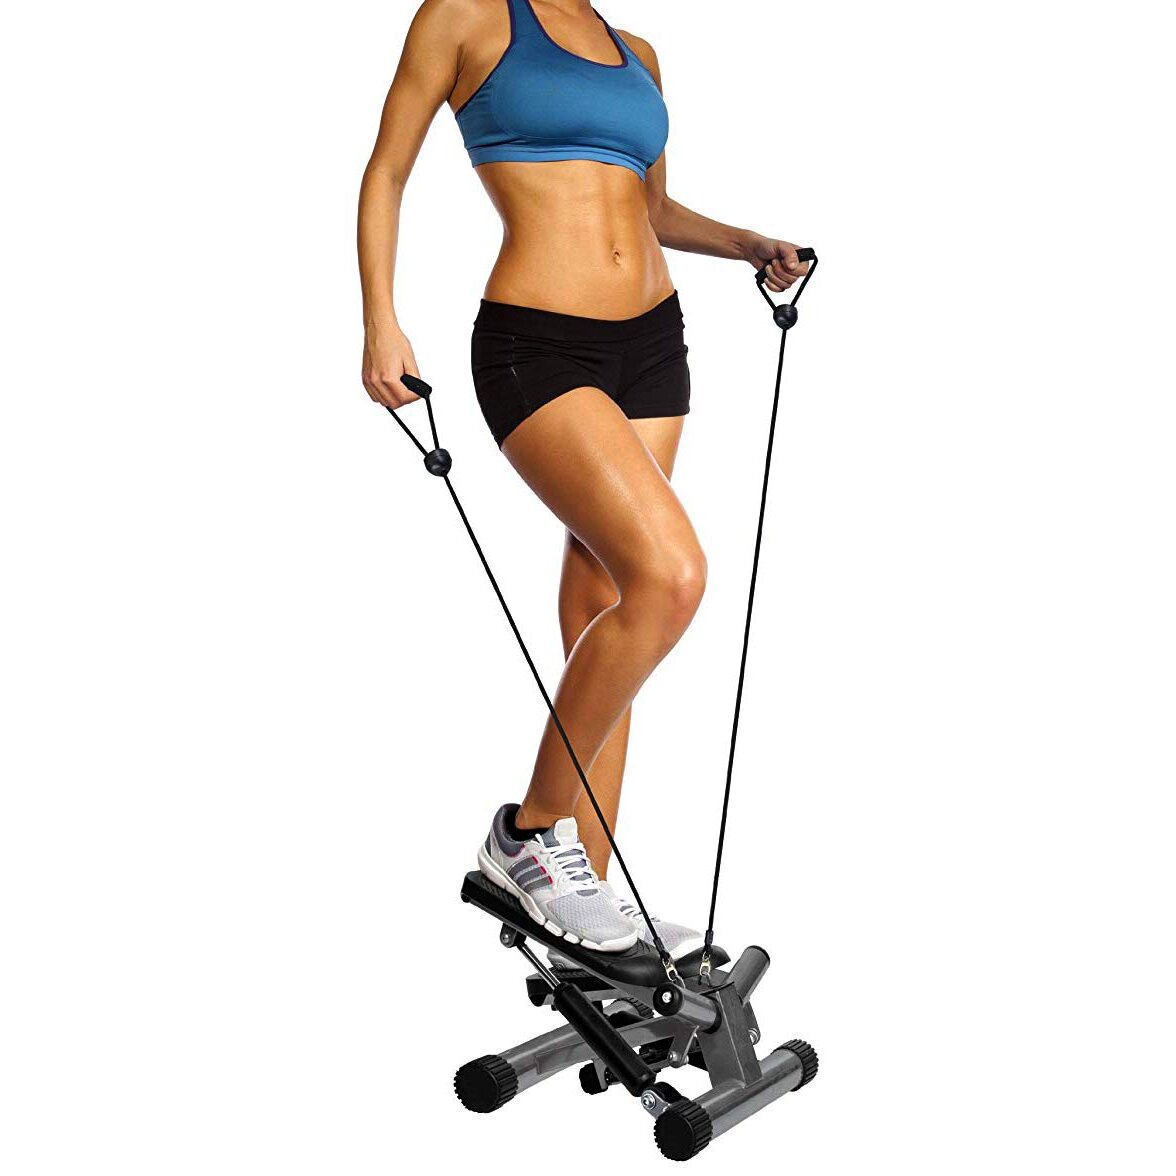 BalanceFrom Adjustable Stepper Stepping Machine with Resistance Bands, gray